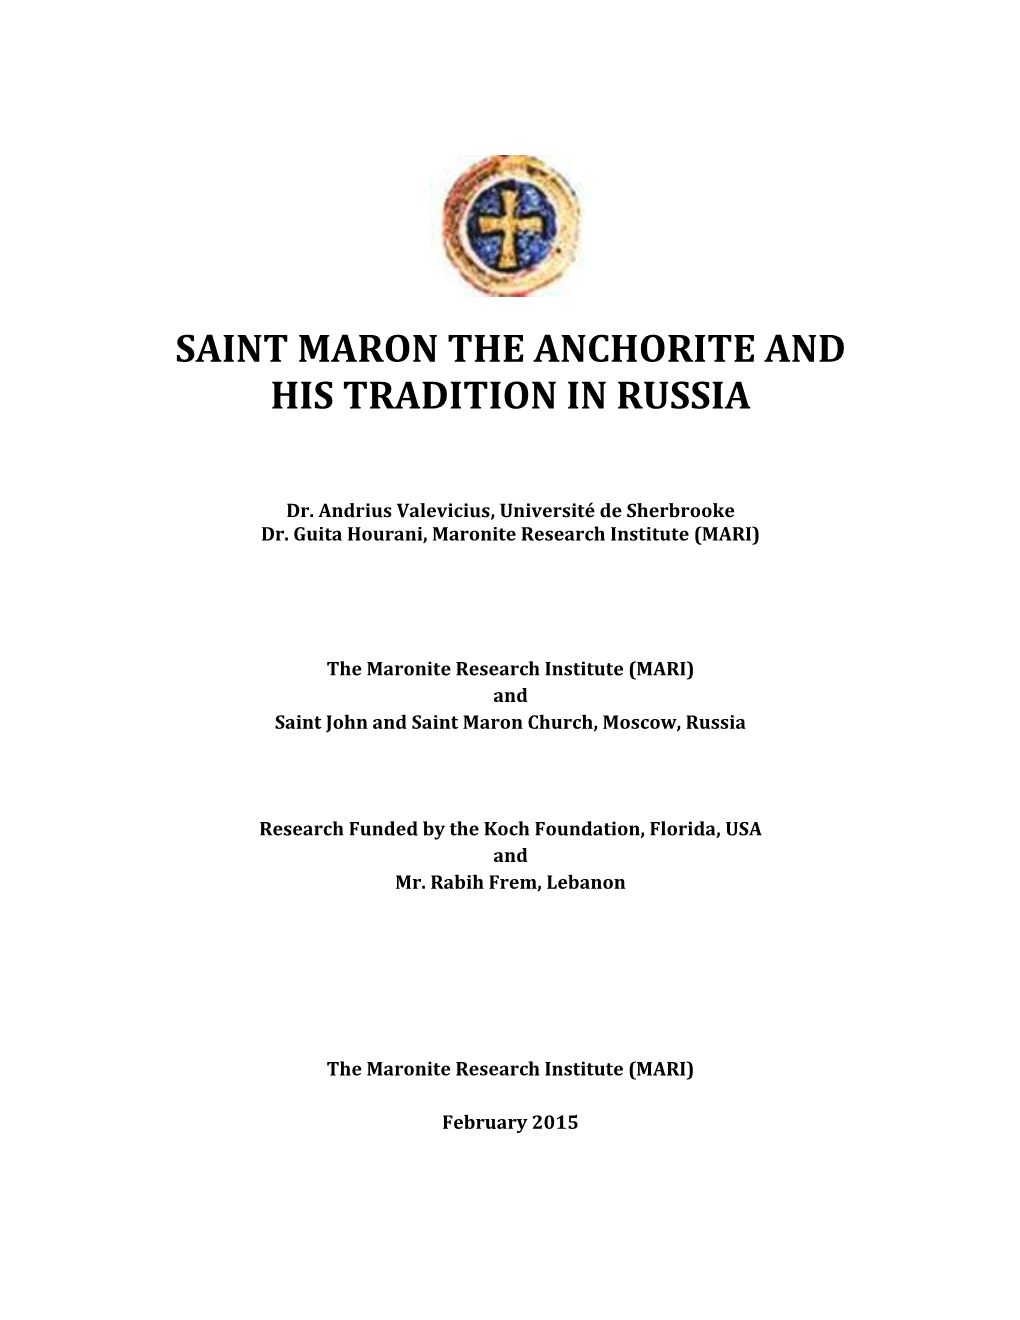 Saint Maron the Anchorite and His Tradition in Russia